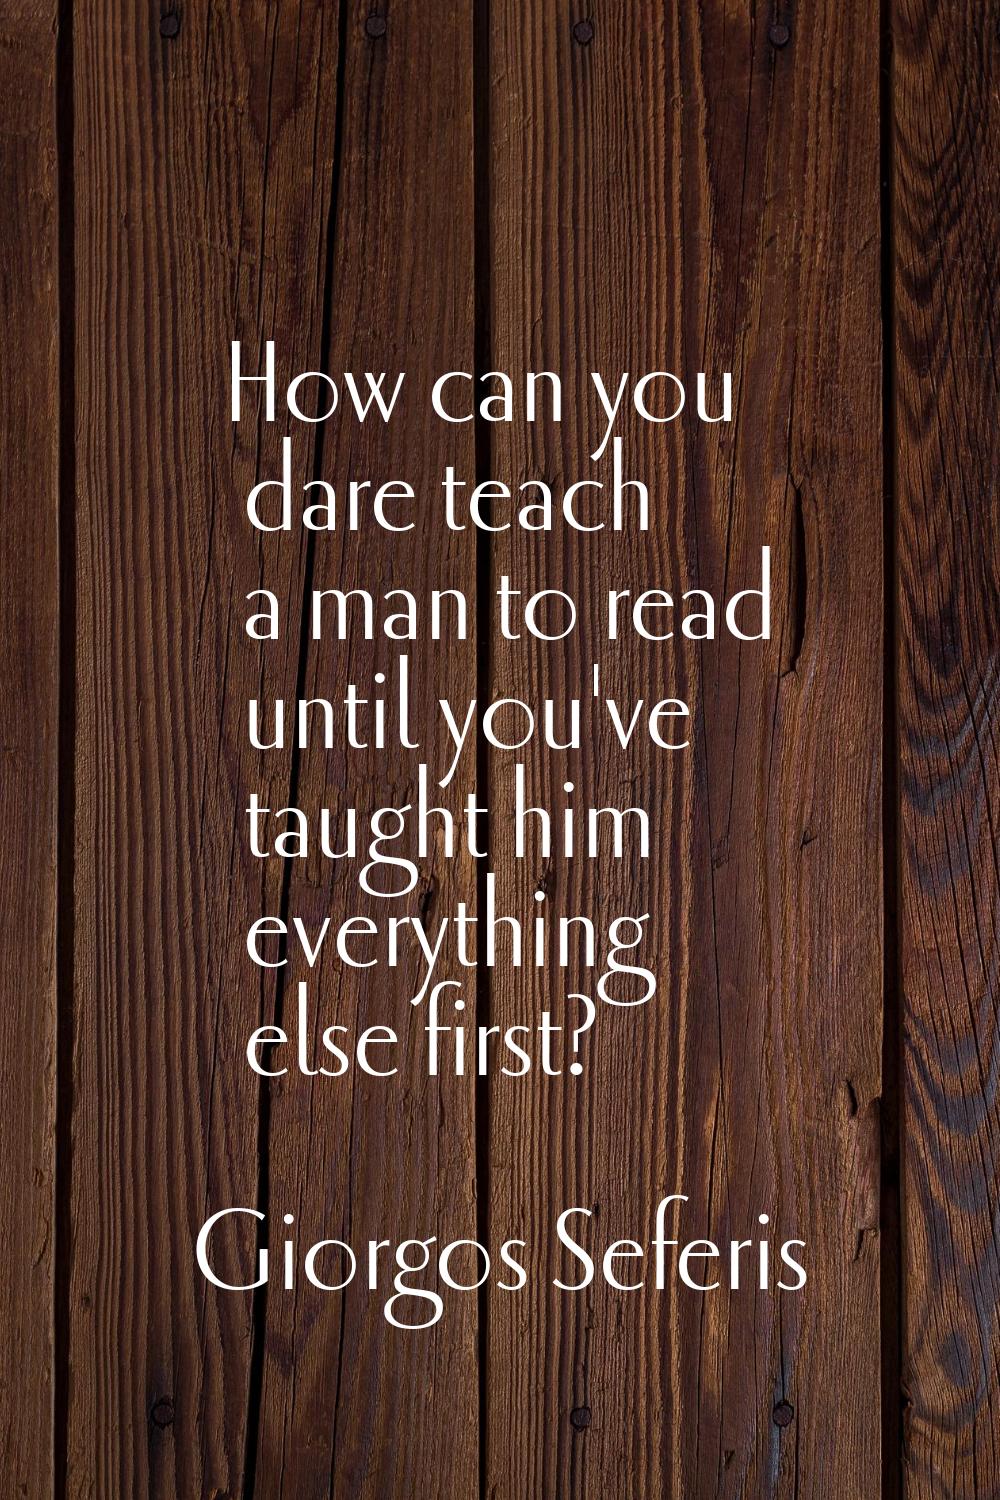 How can you dare teach a man to read until you've taught him everything else first?